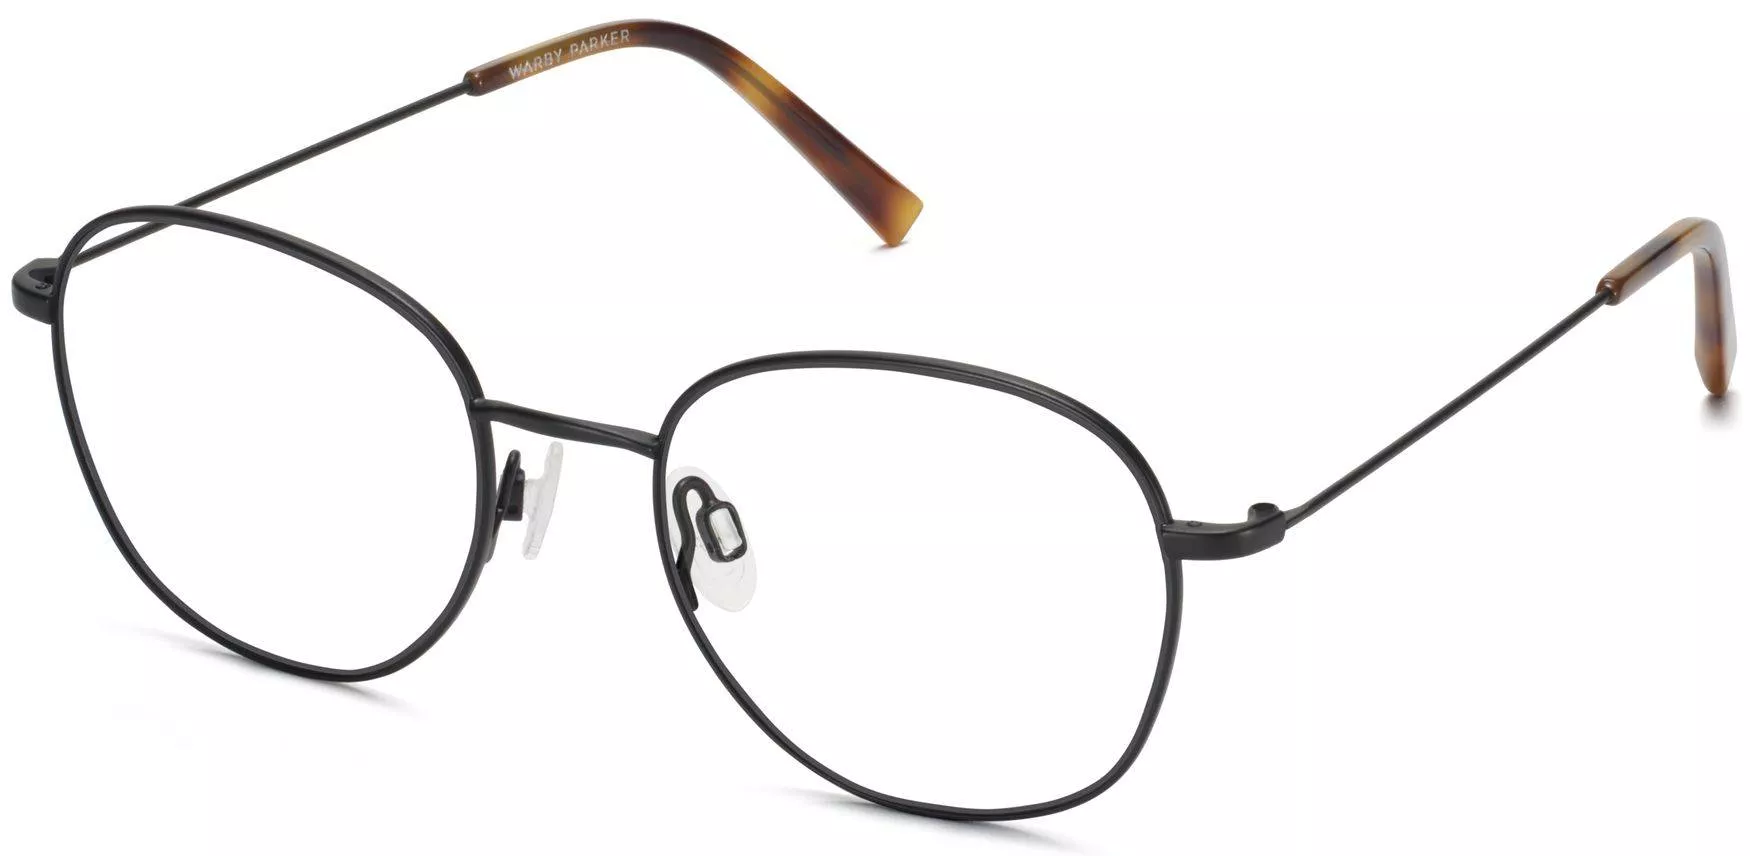 Angle View Image of Cyrus Eyeglasses Collection, by Warby Parker Brand, in Brushed Ink Color